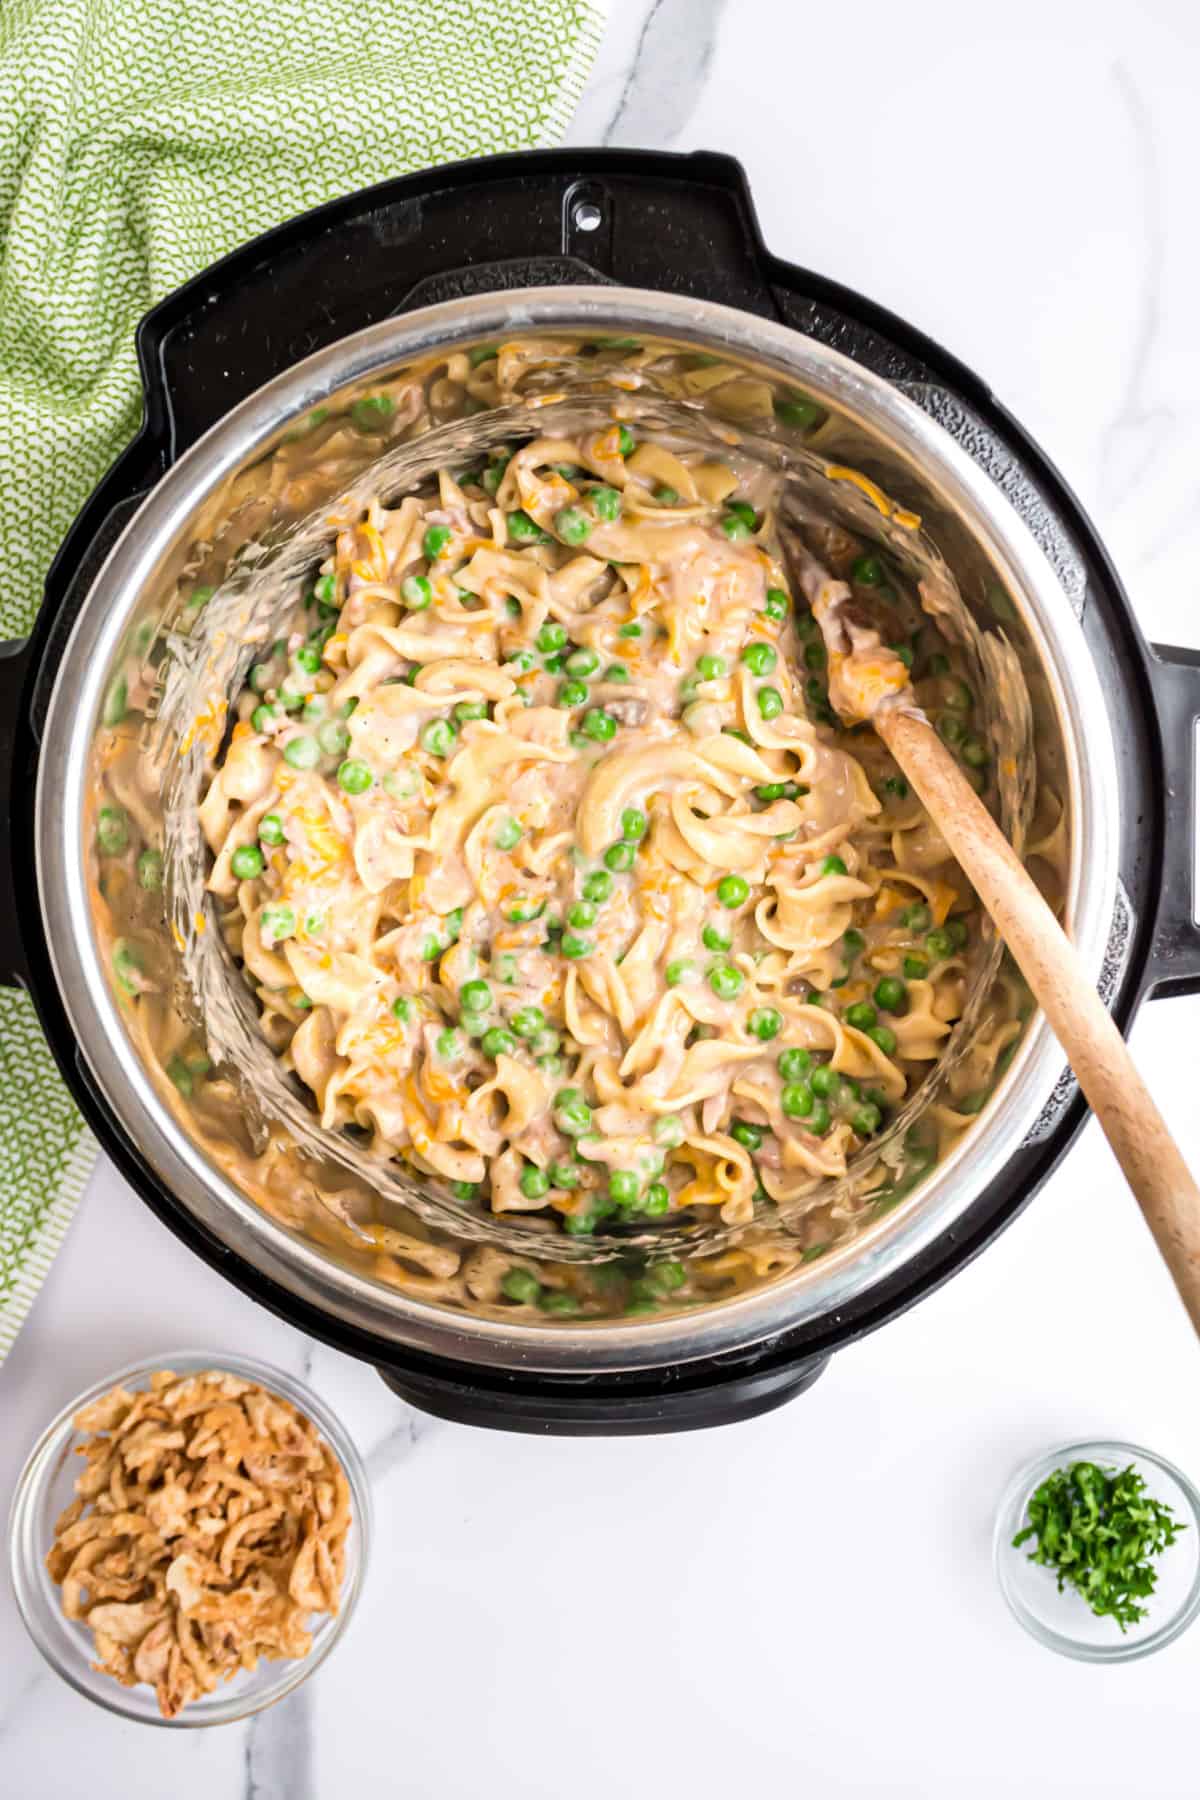 Tuna casserole in the instant pot with a wooden spoon.